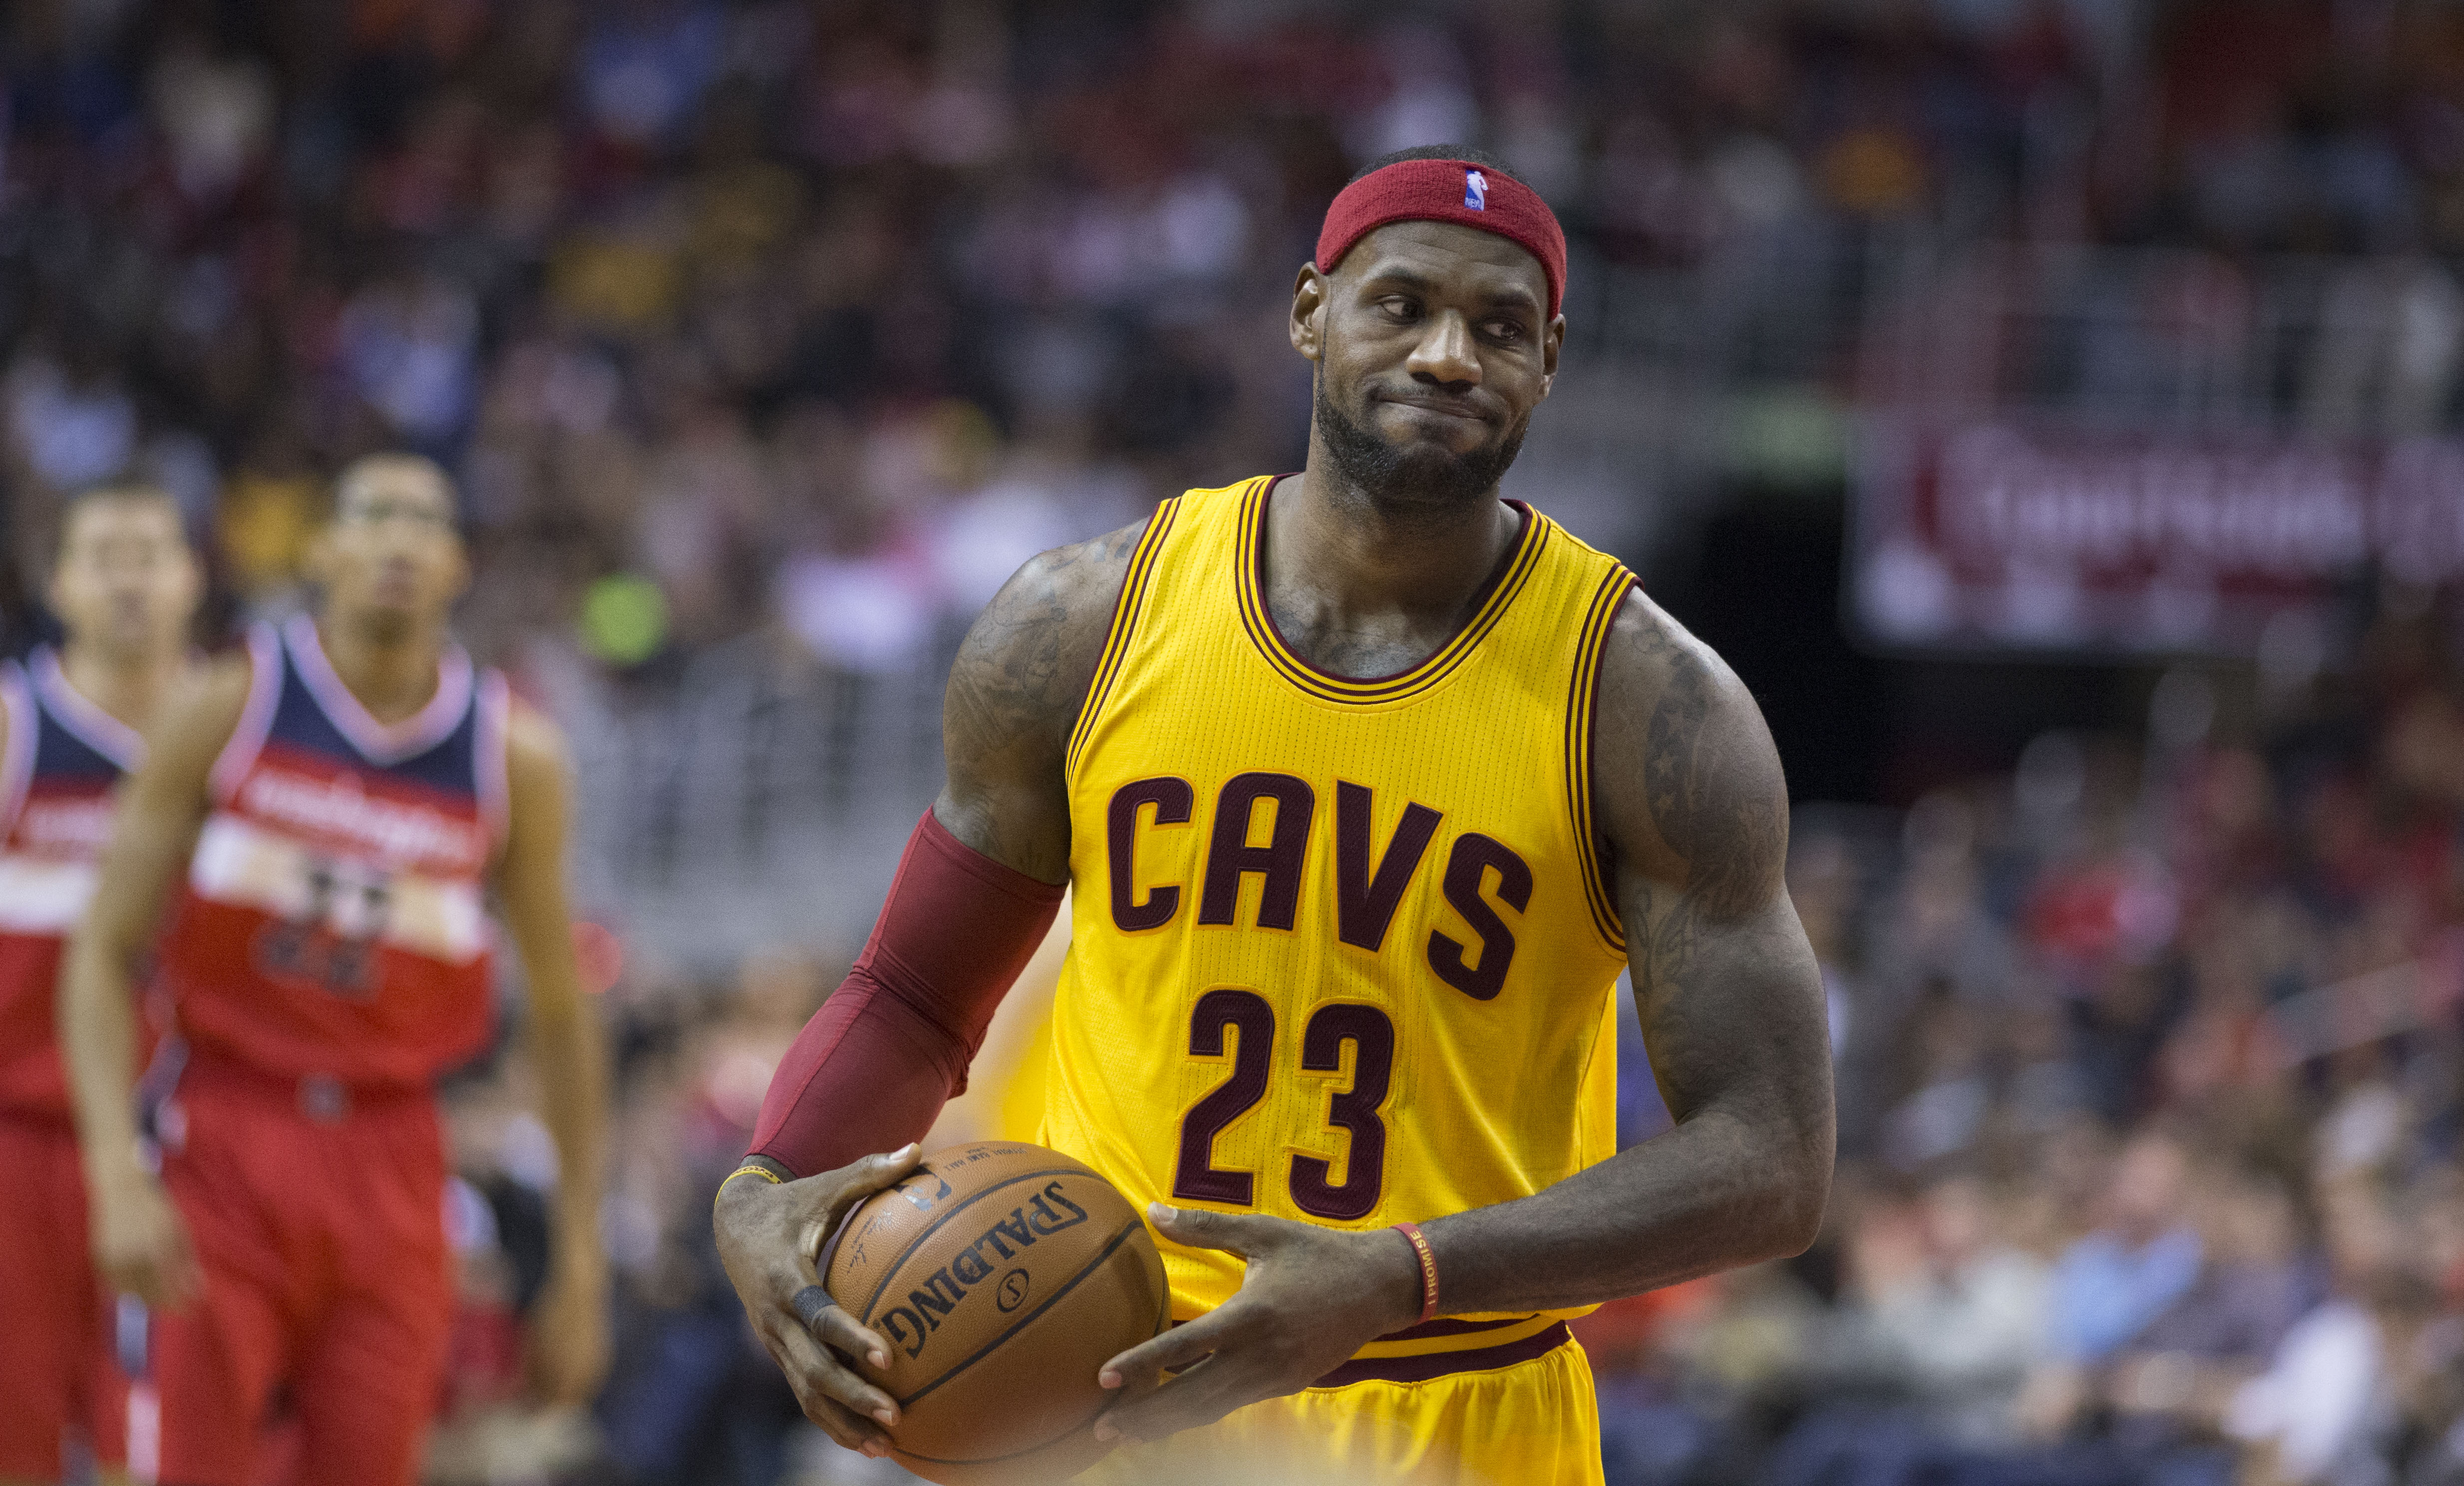 As LeBron James approaches the NBA's all-time scoring record, he's